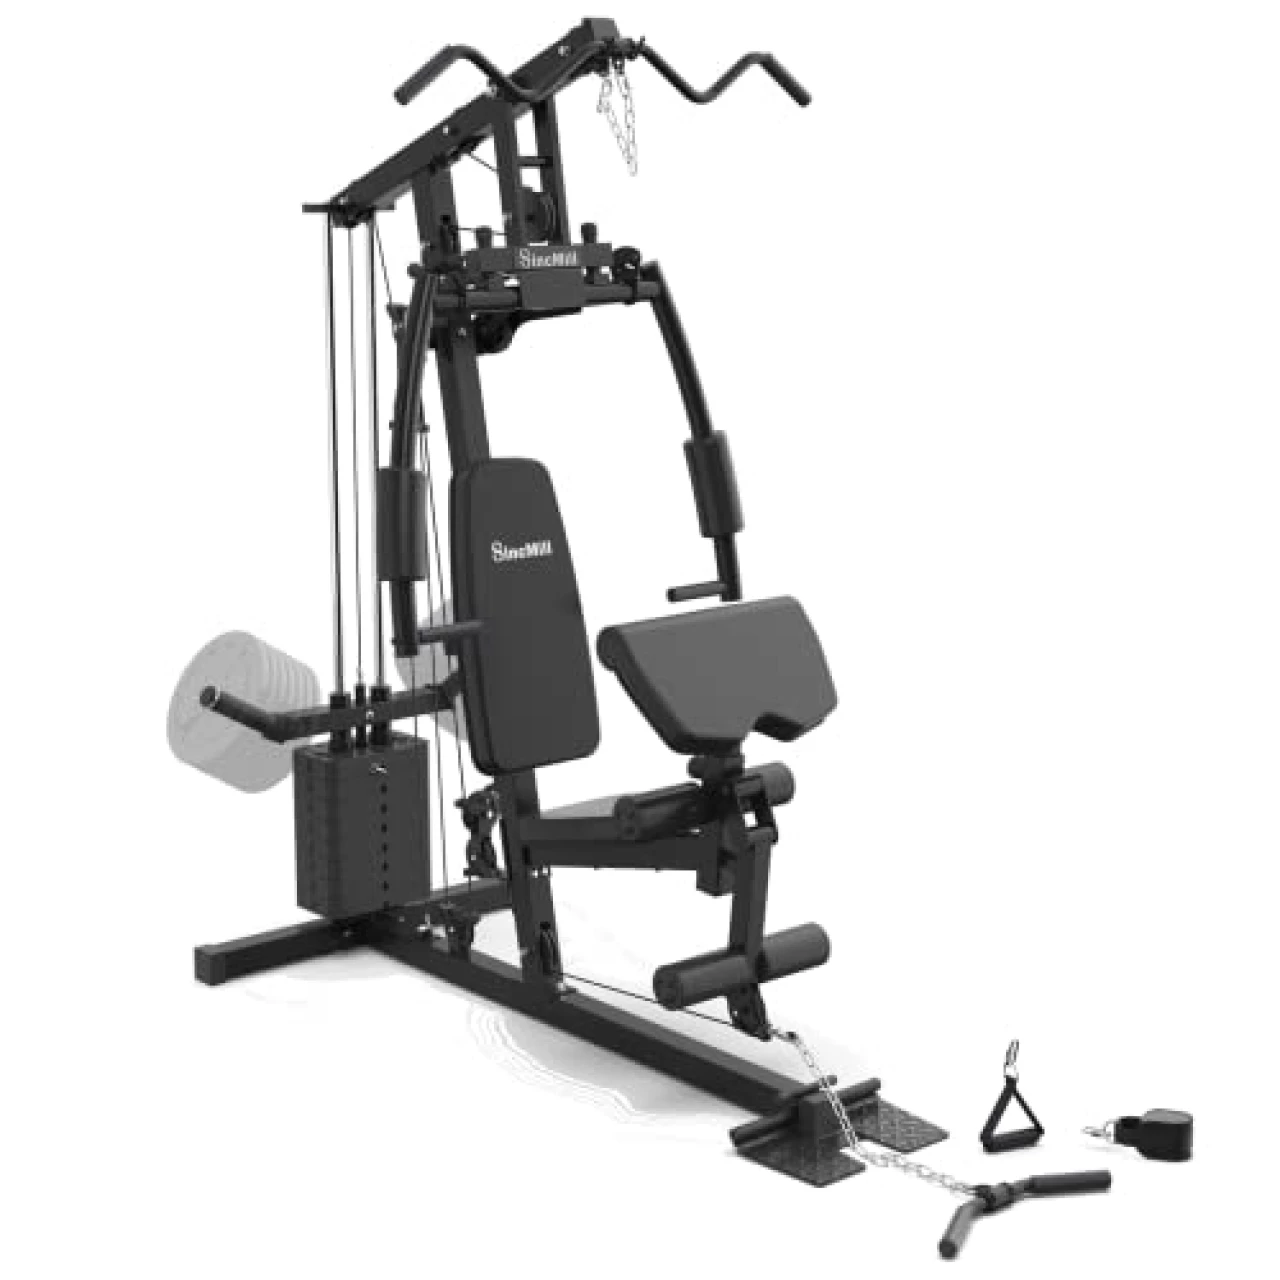 Home Gym SCM-180 80LB Can Add Weights Multifunctional Full Body Home Gym Equipment